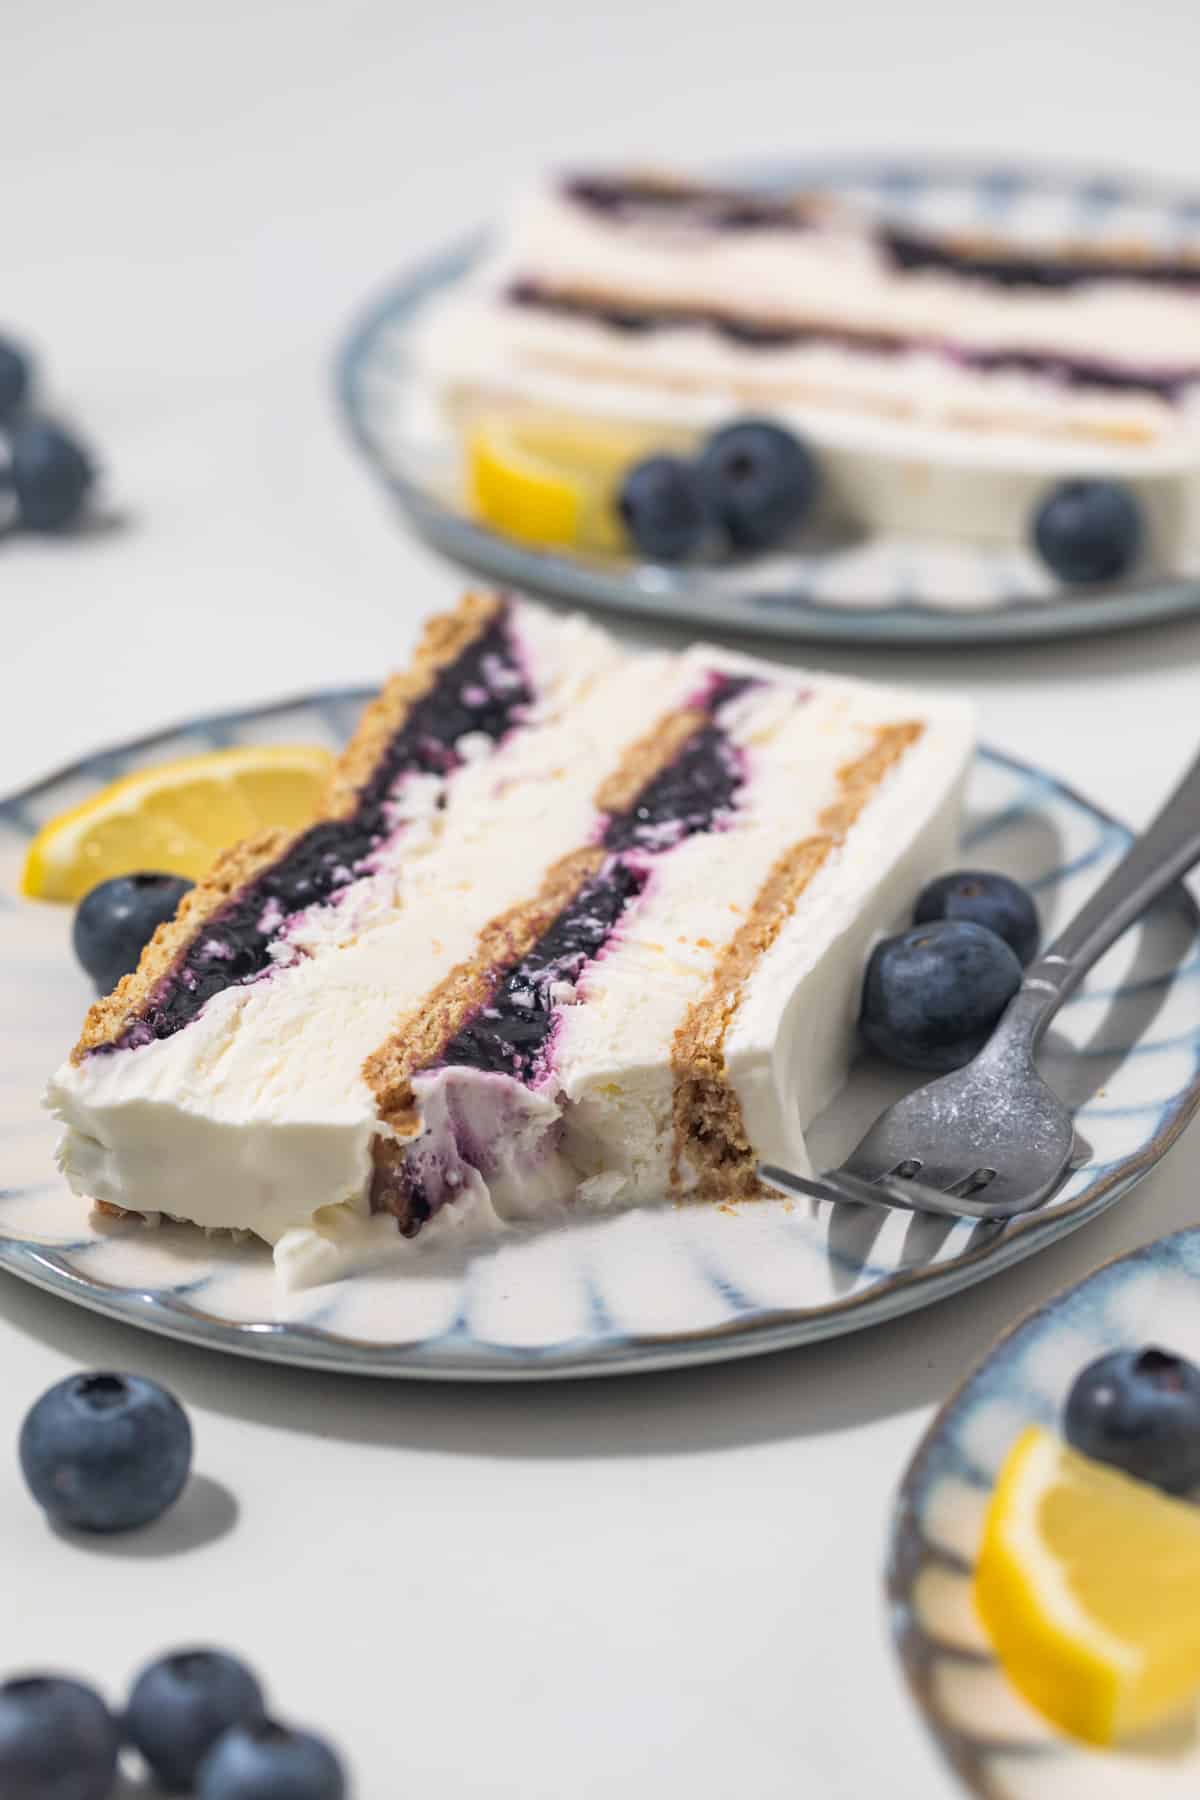 Slice of blueberry lemon icebox cake with a bite taken out.